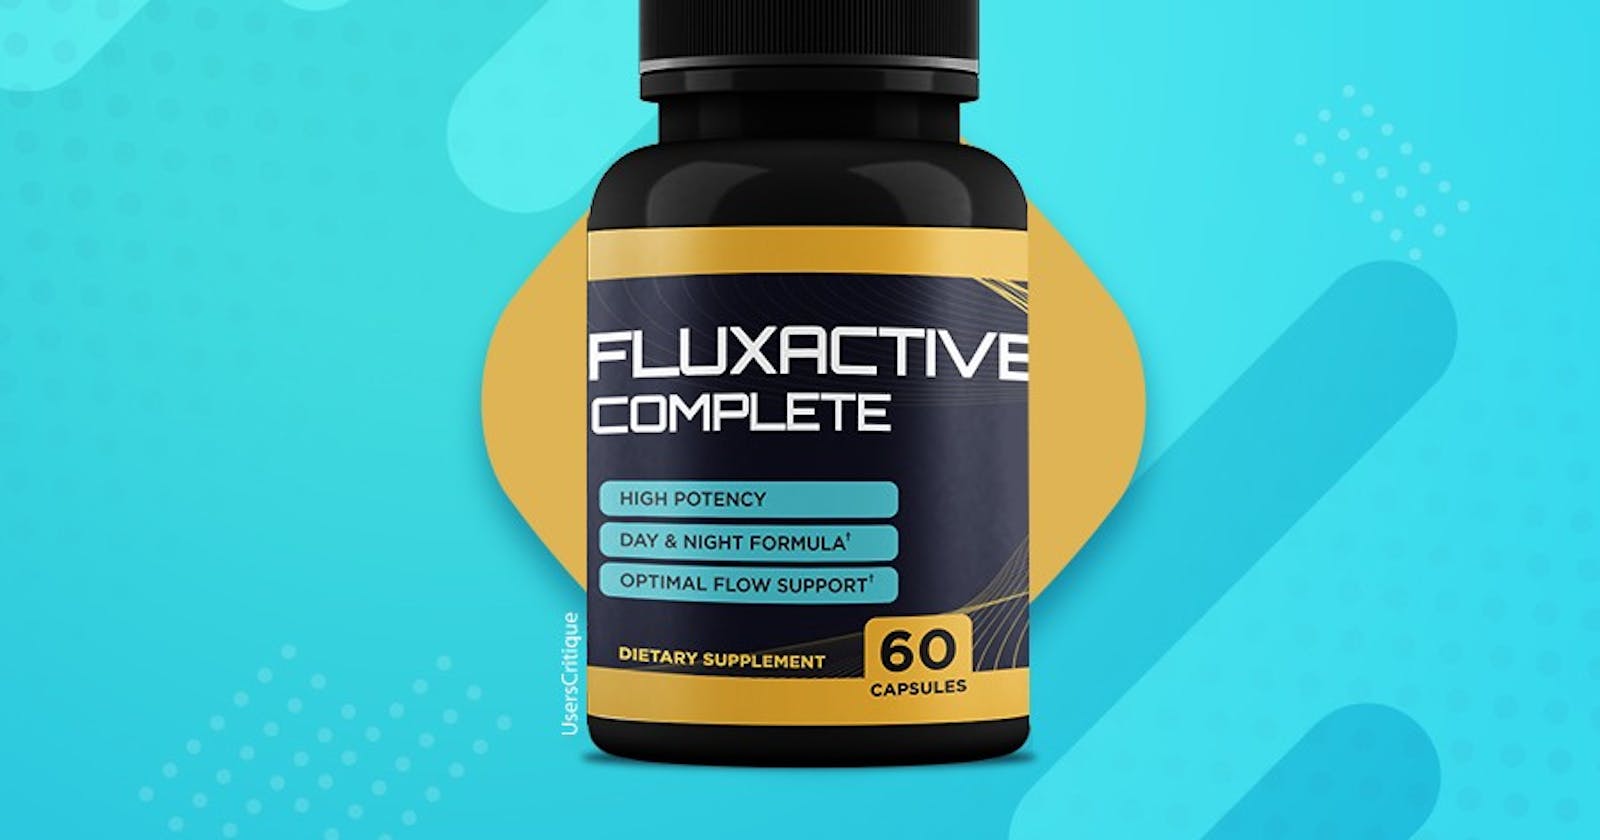 Fluxactive Complete - Prostate Health Reviews, Price, Ingredients, Scam Or Legit?